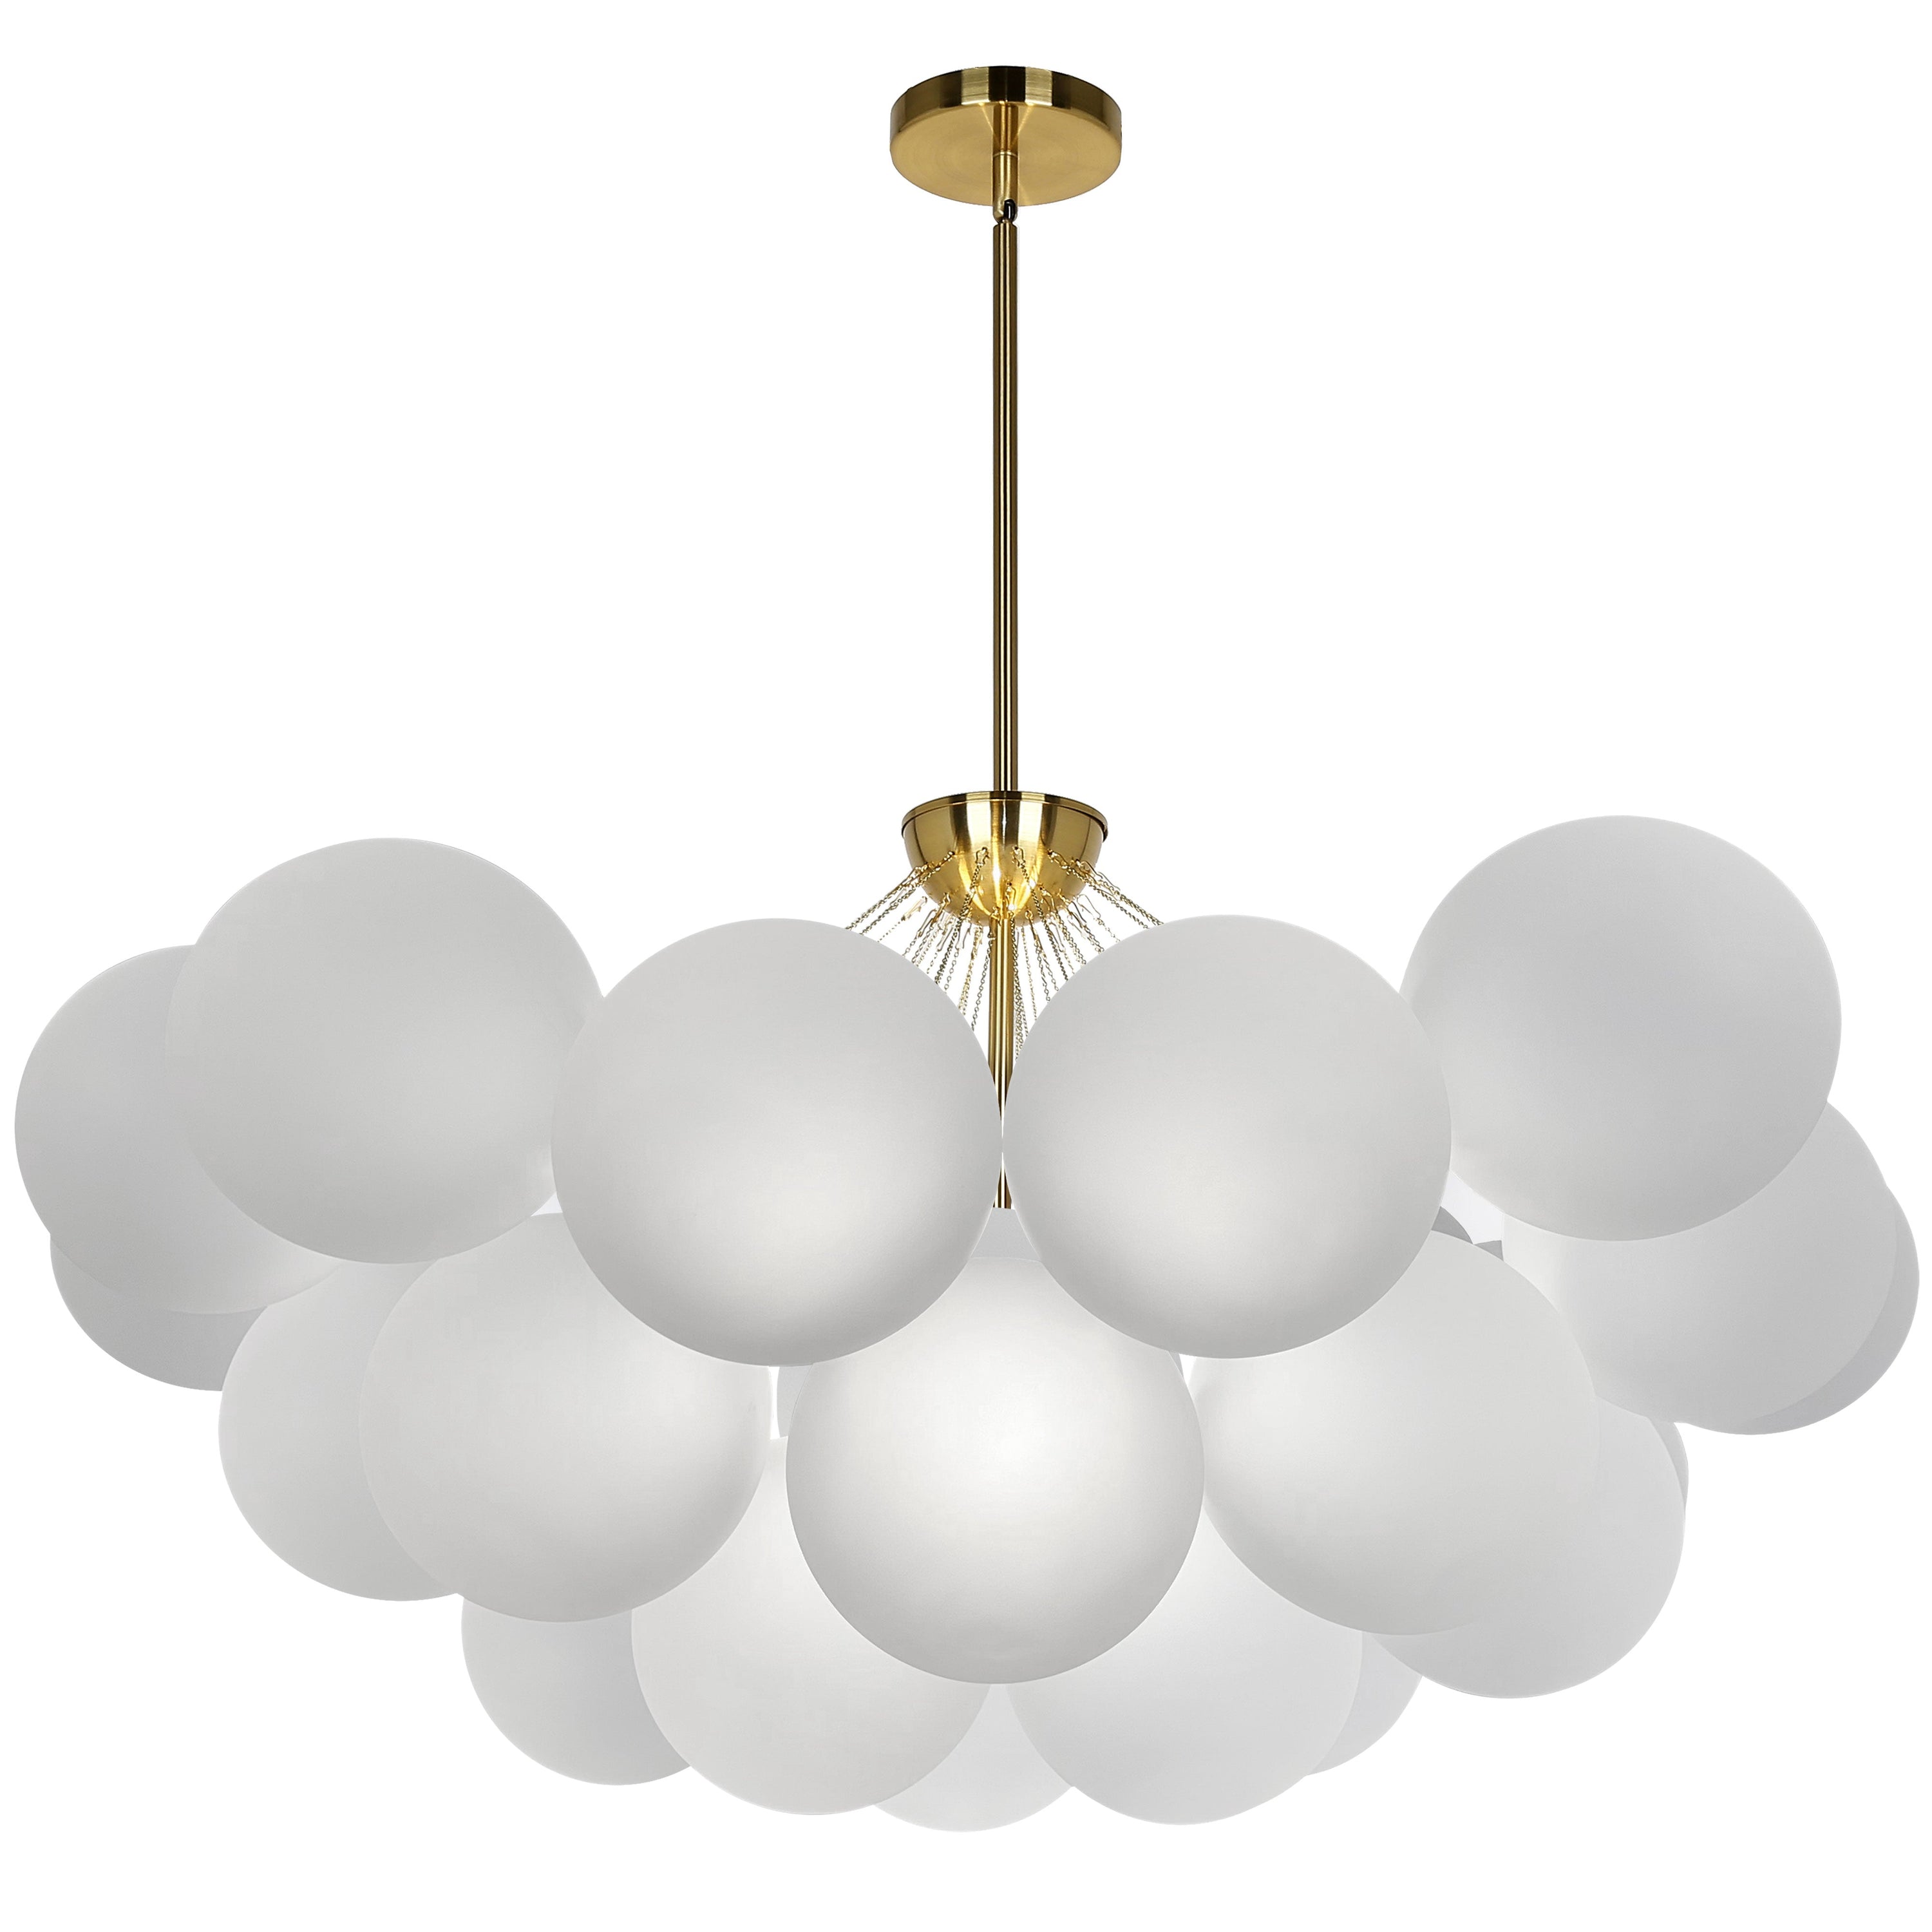 Dainolite Miles - MLS-358C-AGB-FR - 8 Light Aged Brass Chandelier Fixture w/ Frosted Glass - White